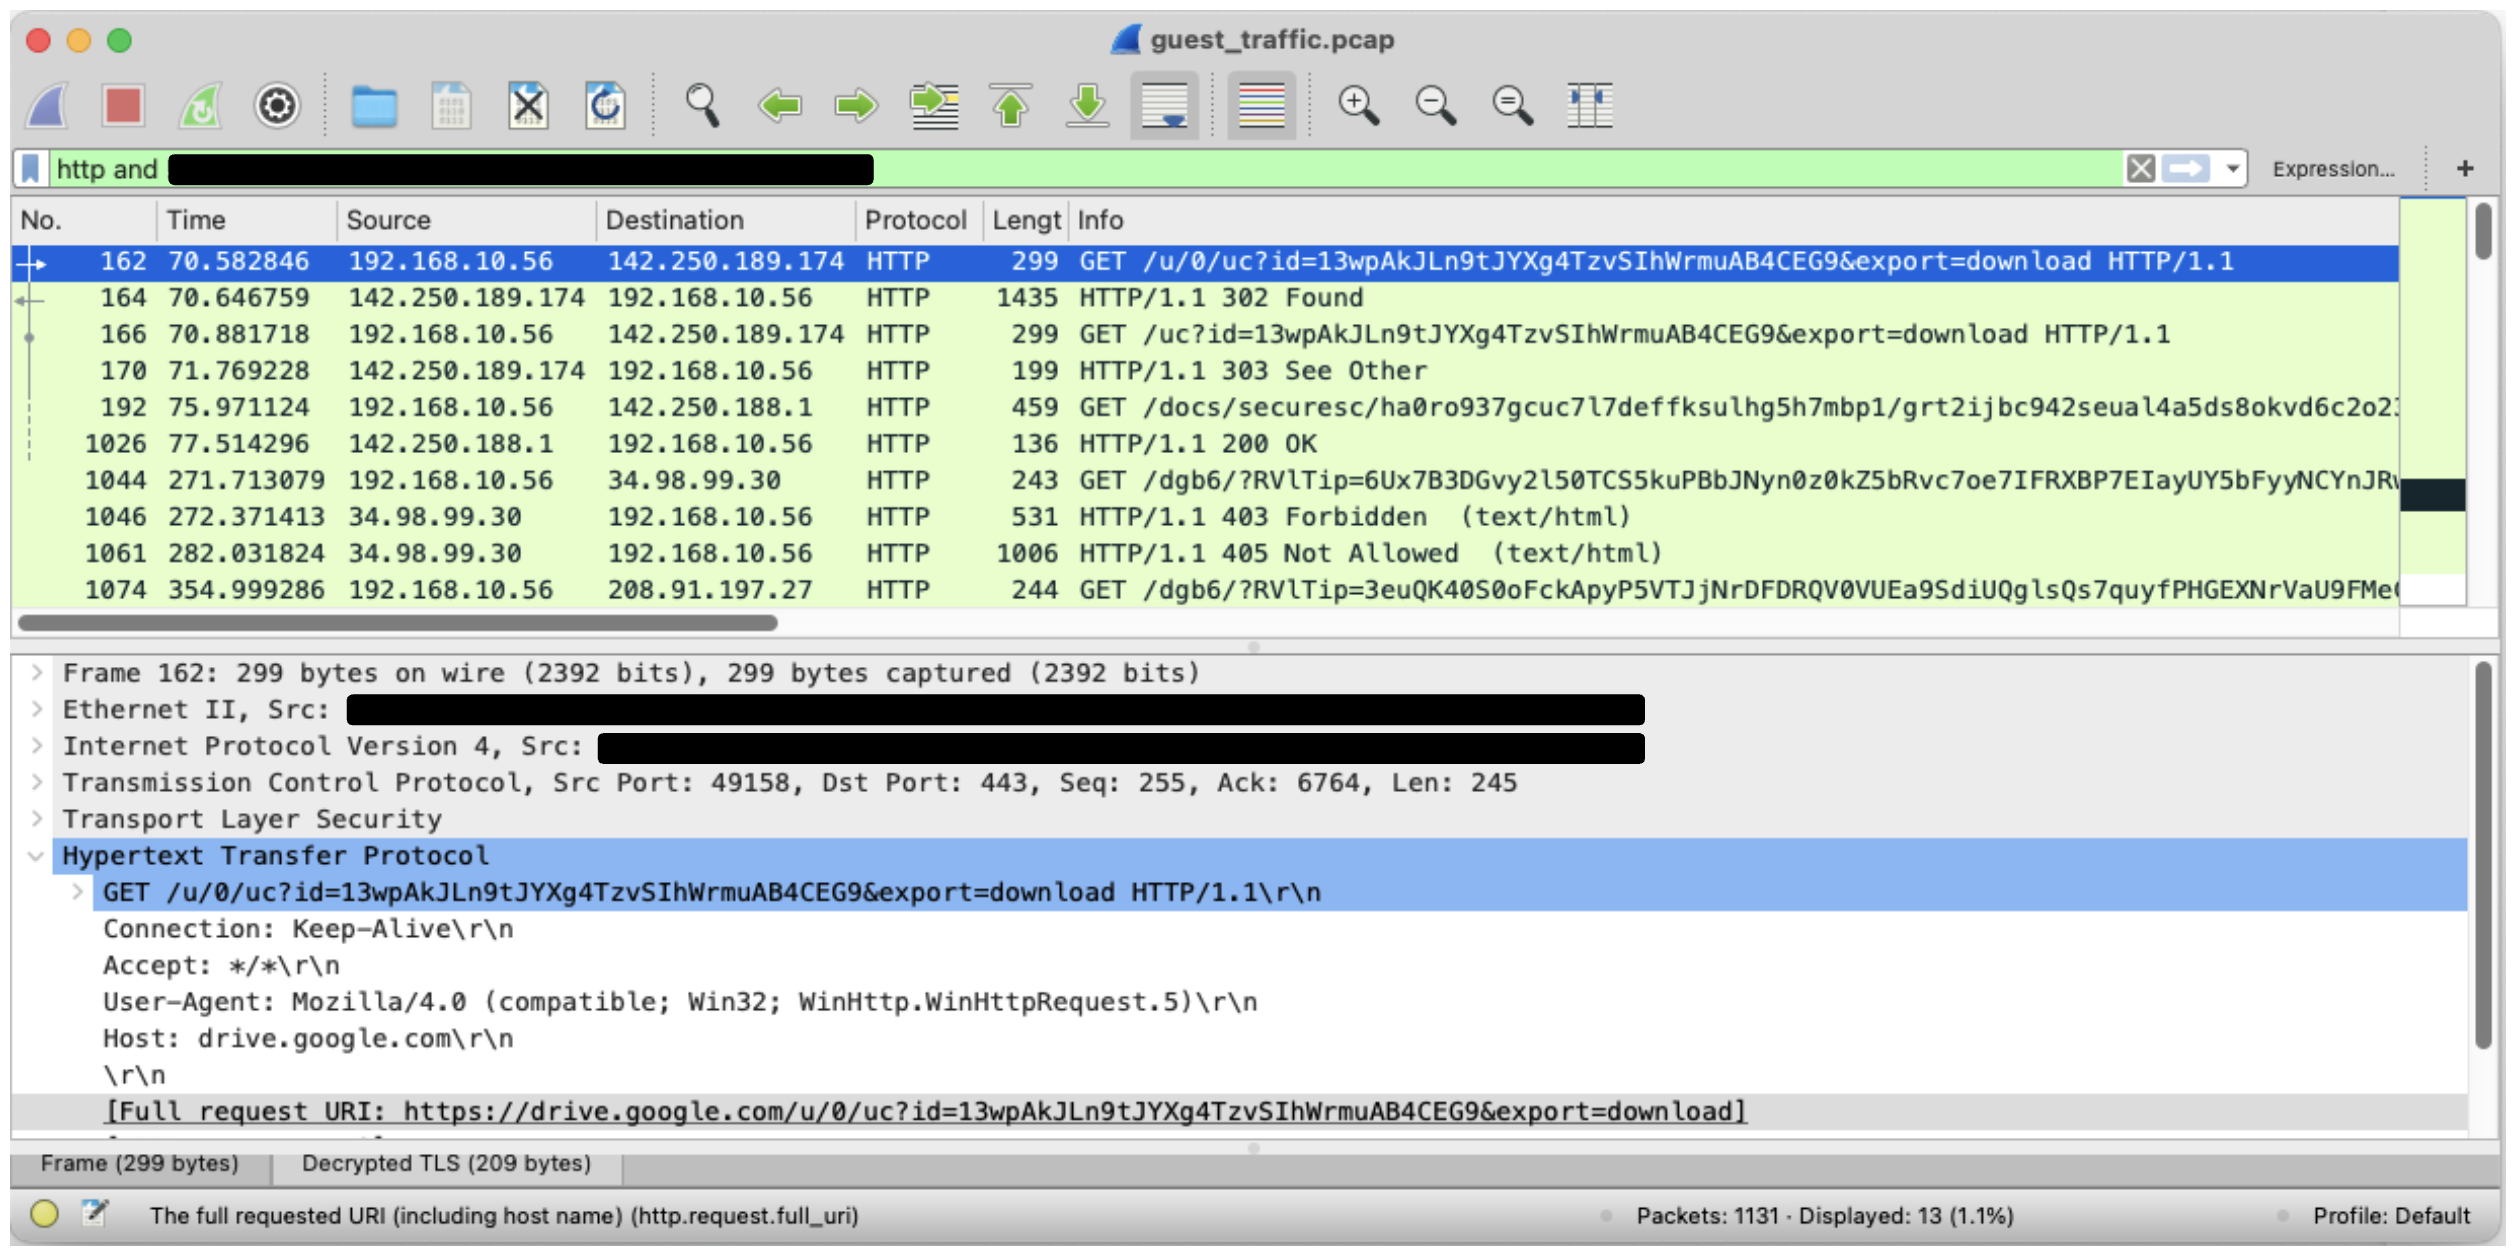 Image 8 is a screenshot of Wireshark showing the decrypted HTTPS traffic.